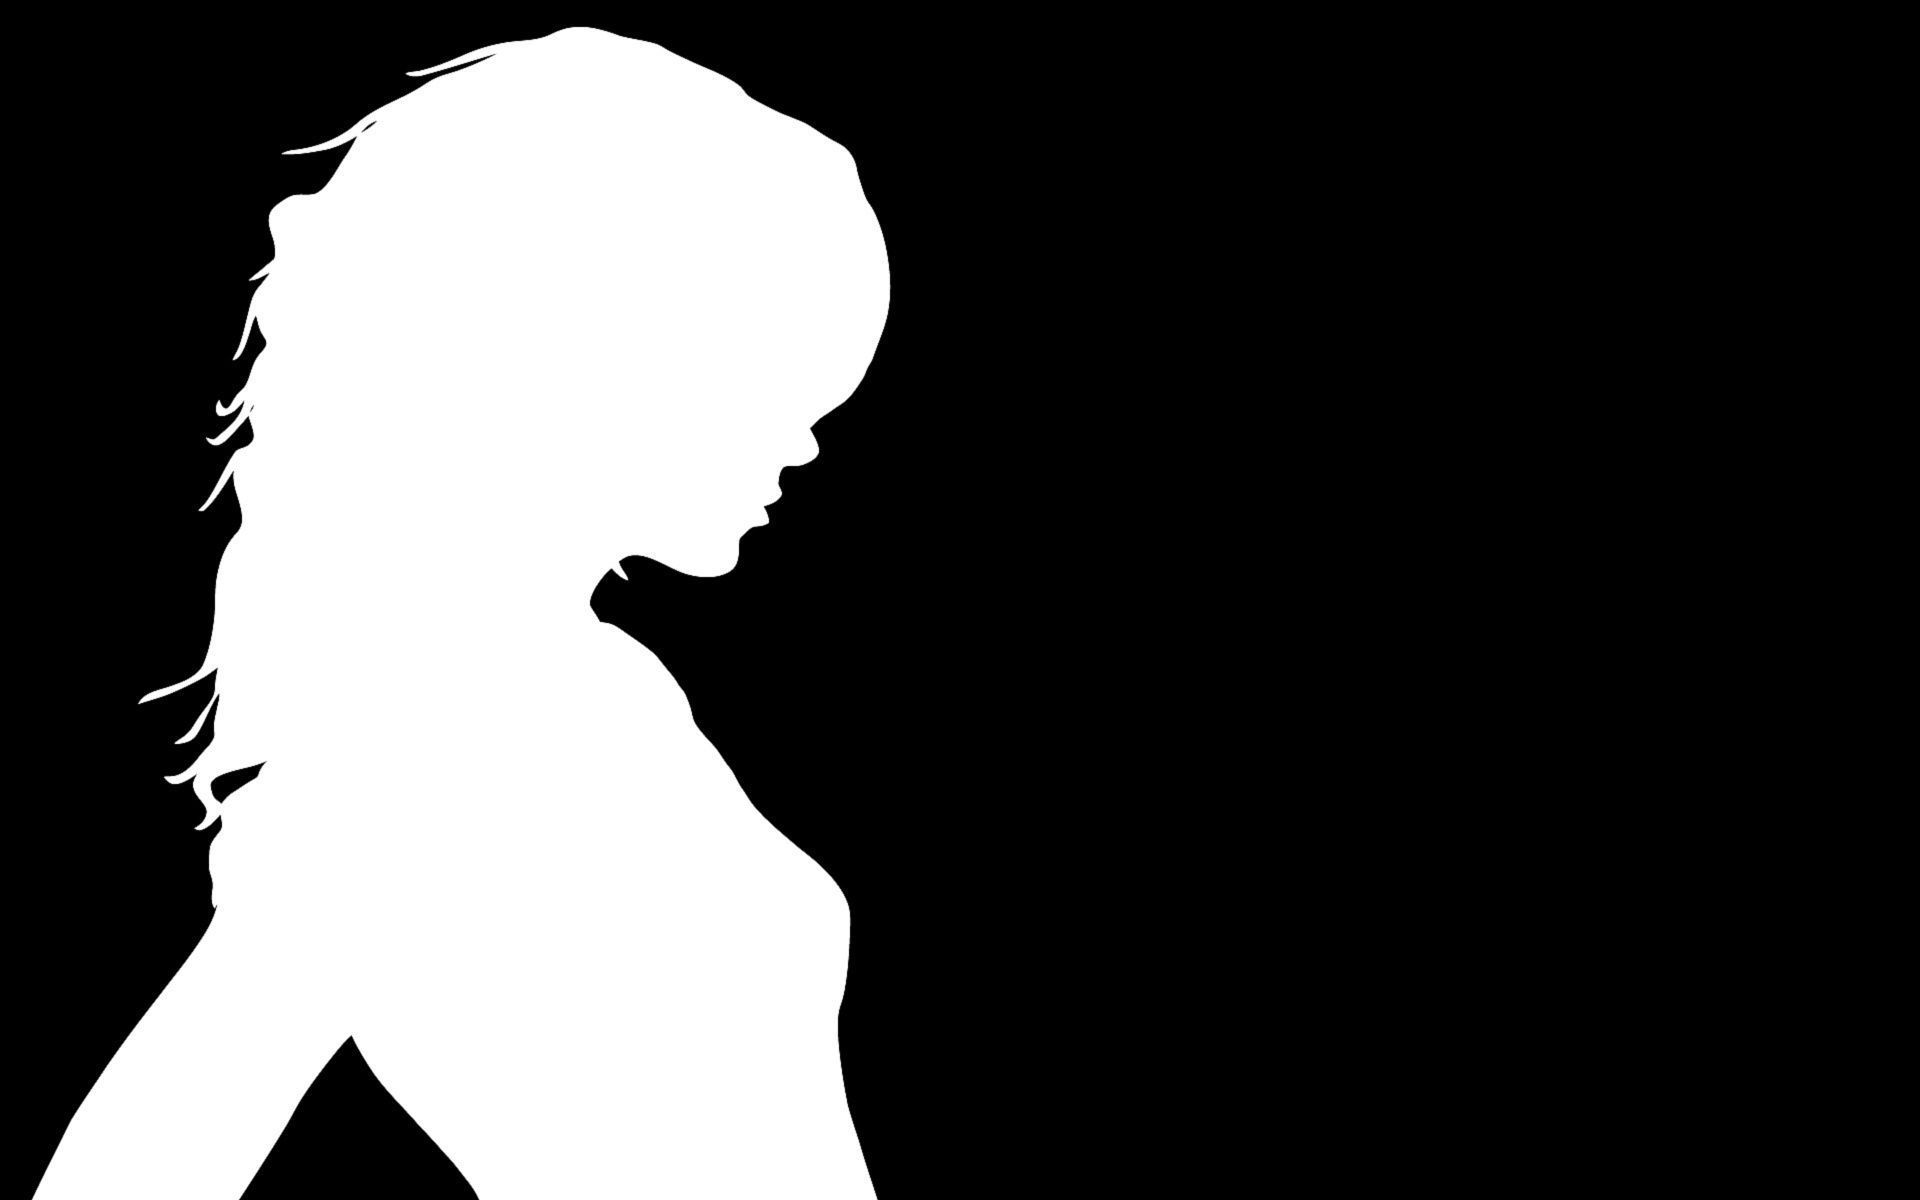 Abstract Women Silhouette Wallpaper Free Abstract Women Silhouette Background